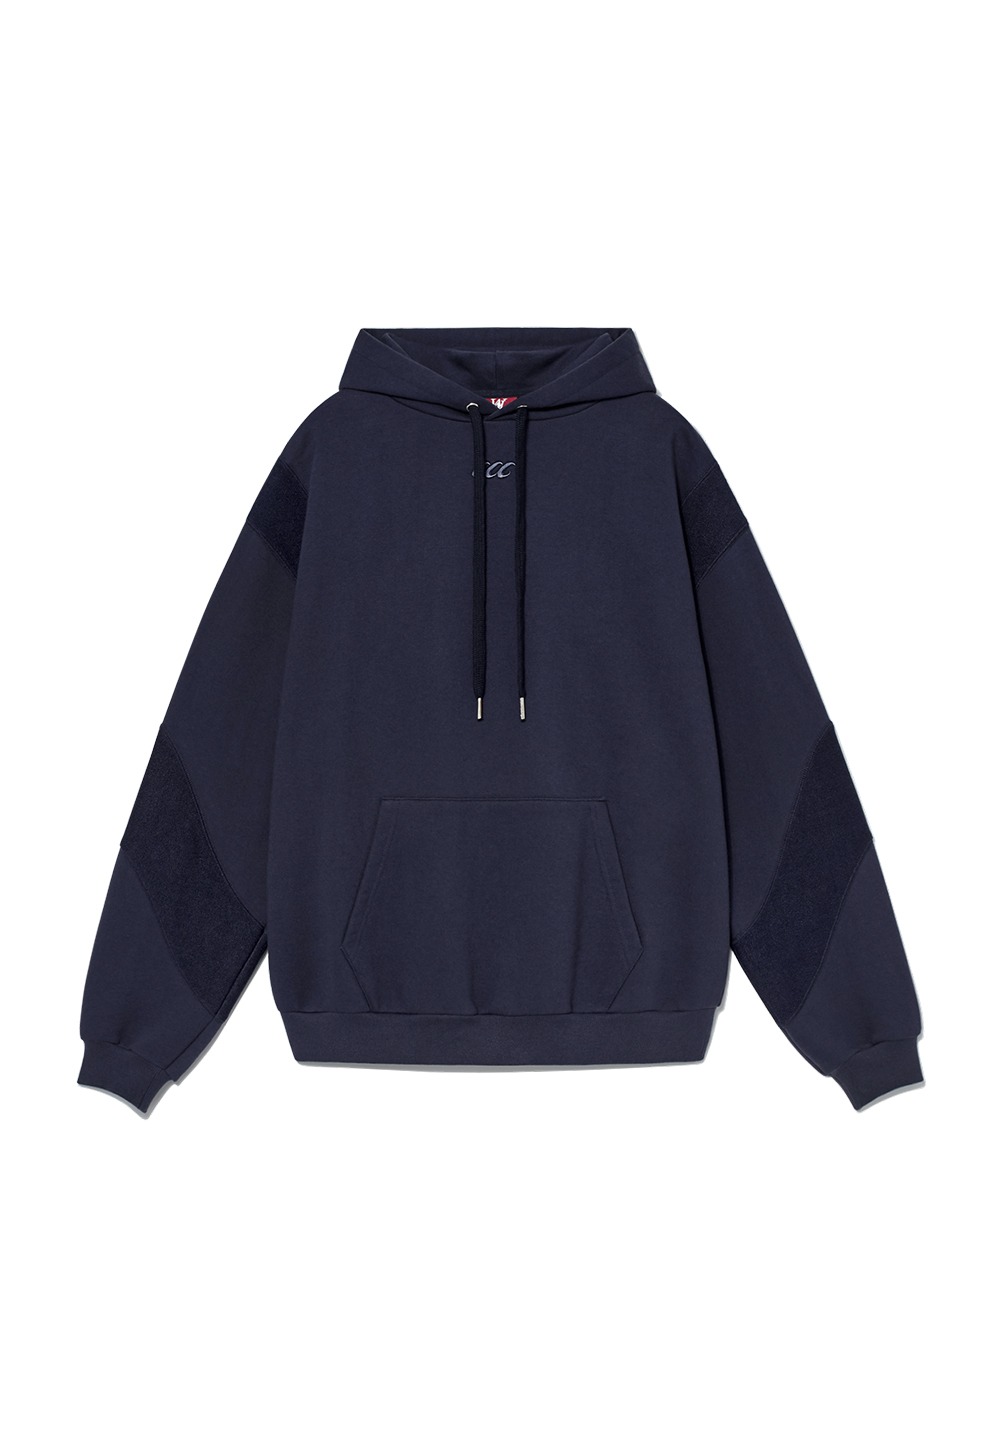 Claw wave slit over hoodie - NAVY